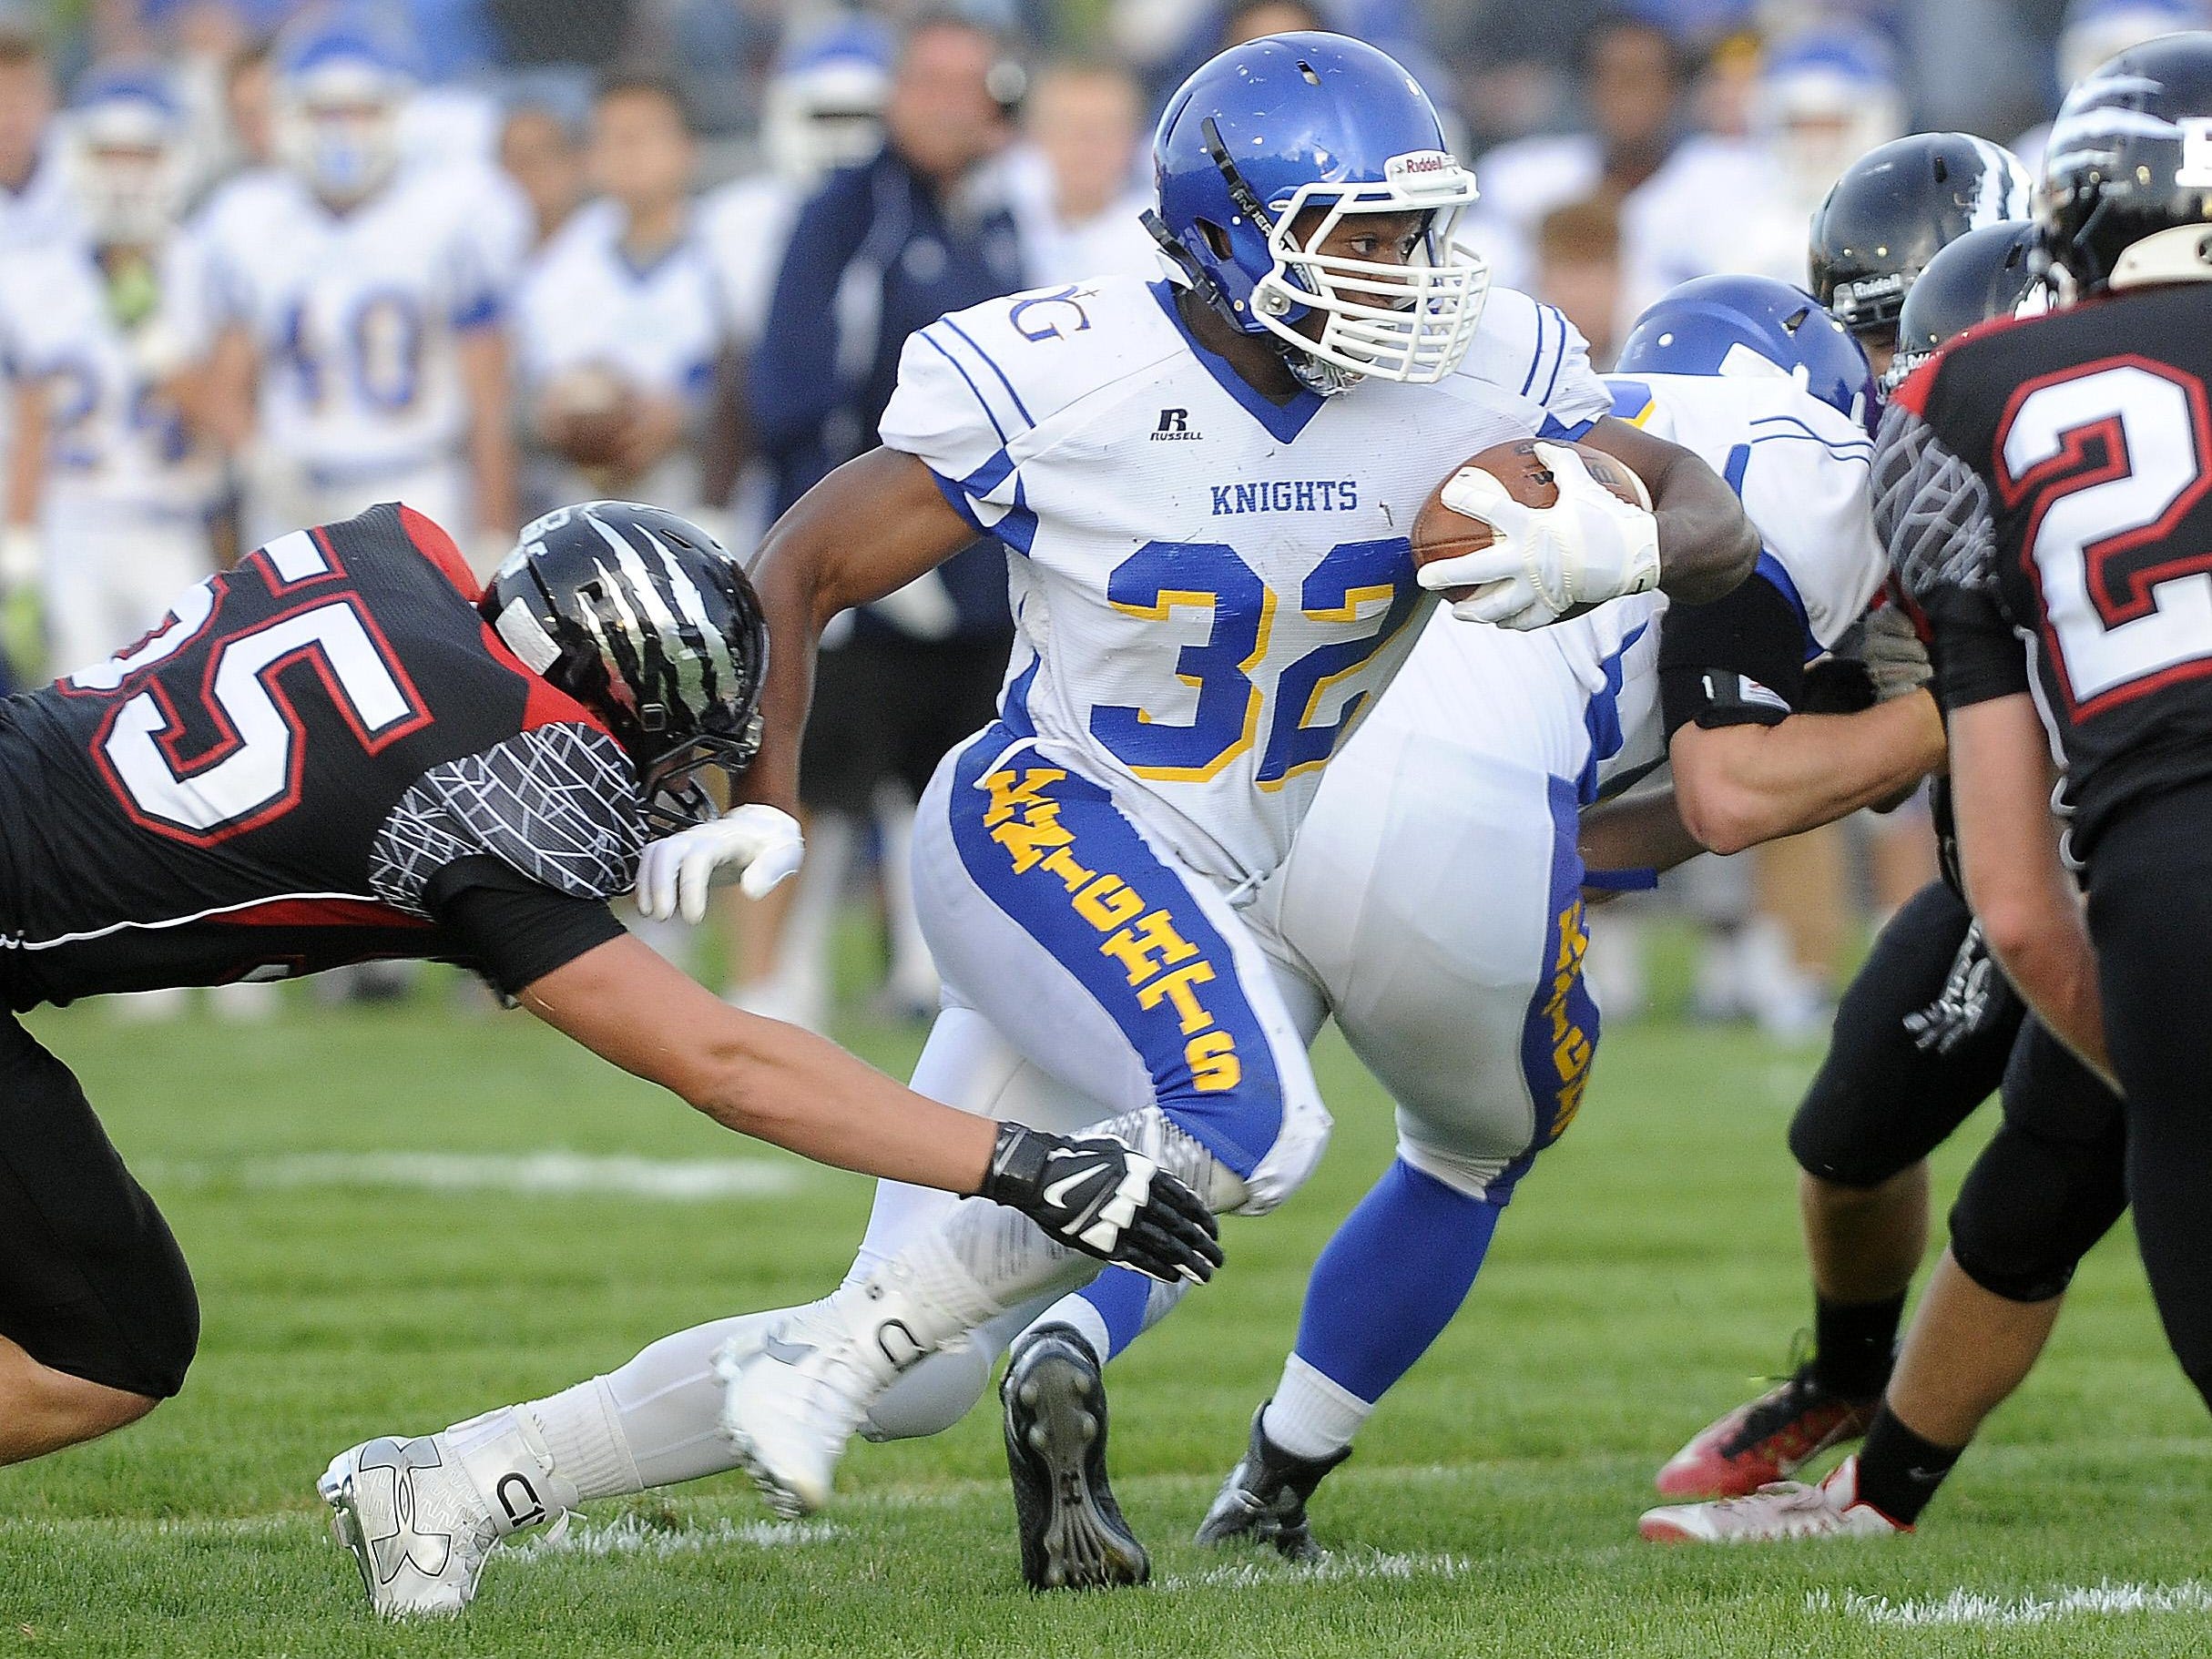 Dodi Makwinja runs against Brandon Valley in September. Makwinja rushed 15 times for 128 yards and two scores in the Knights’ 42-10 win over Watertown last Friday.